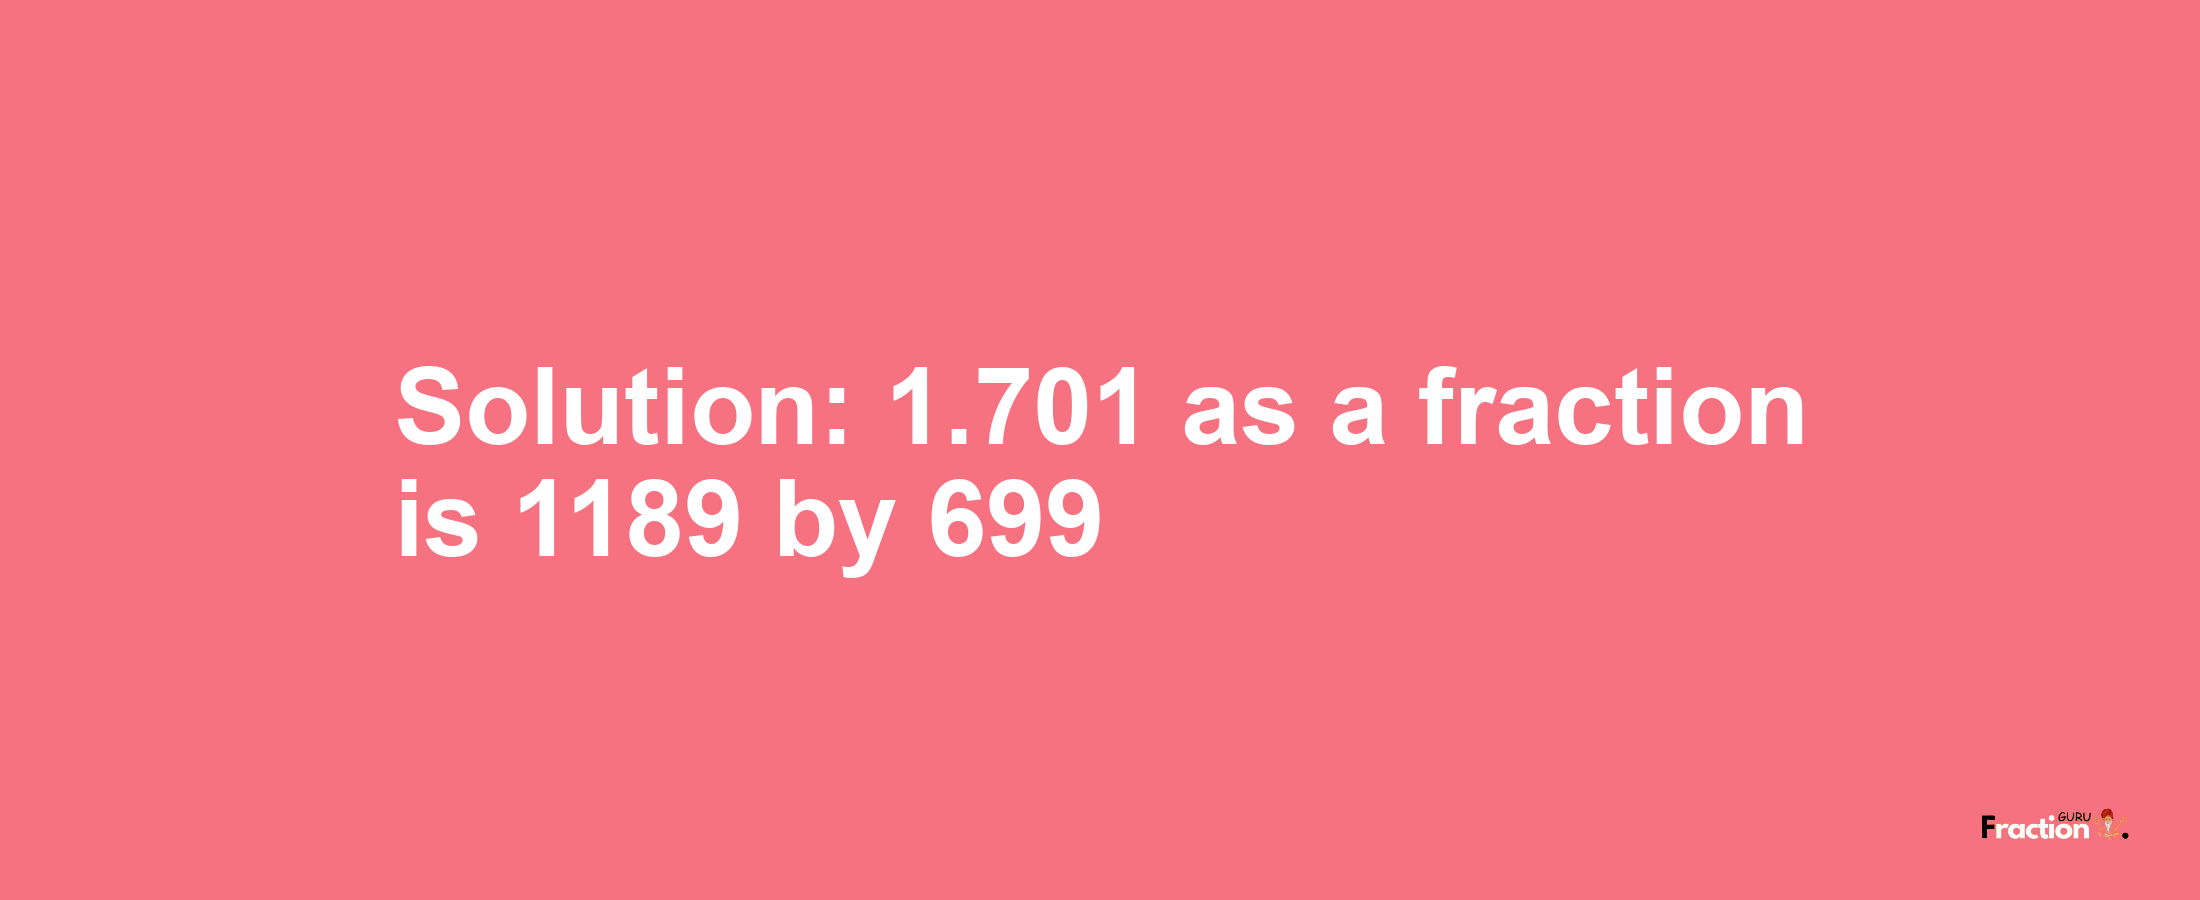 Solution:1.701 as a fraction is 1189/699